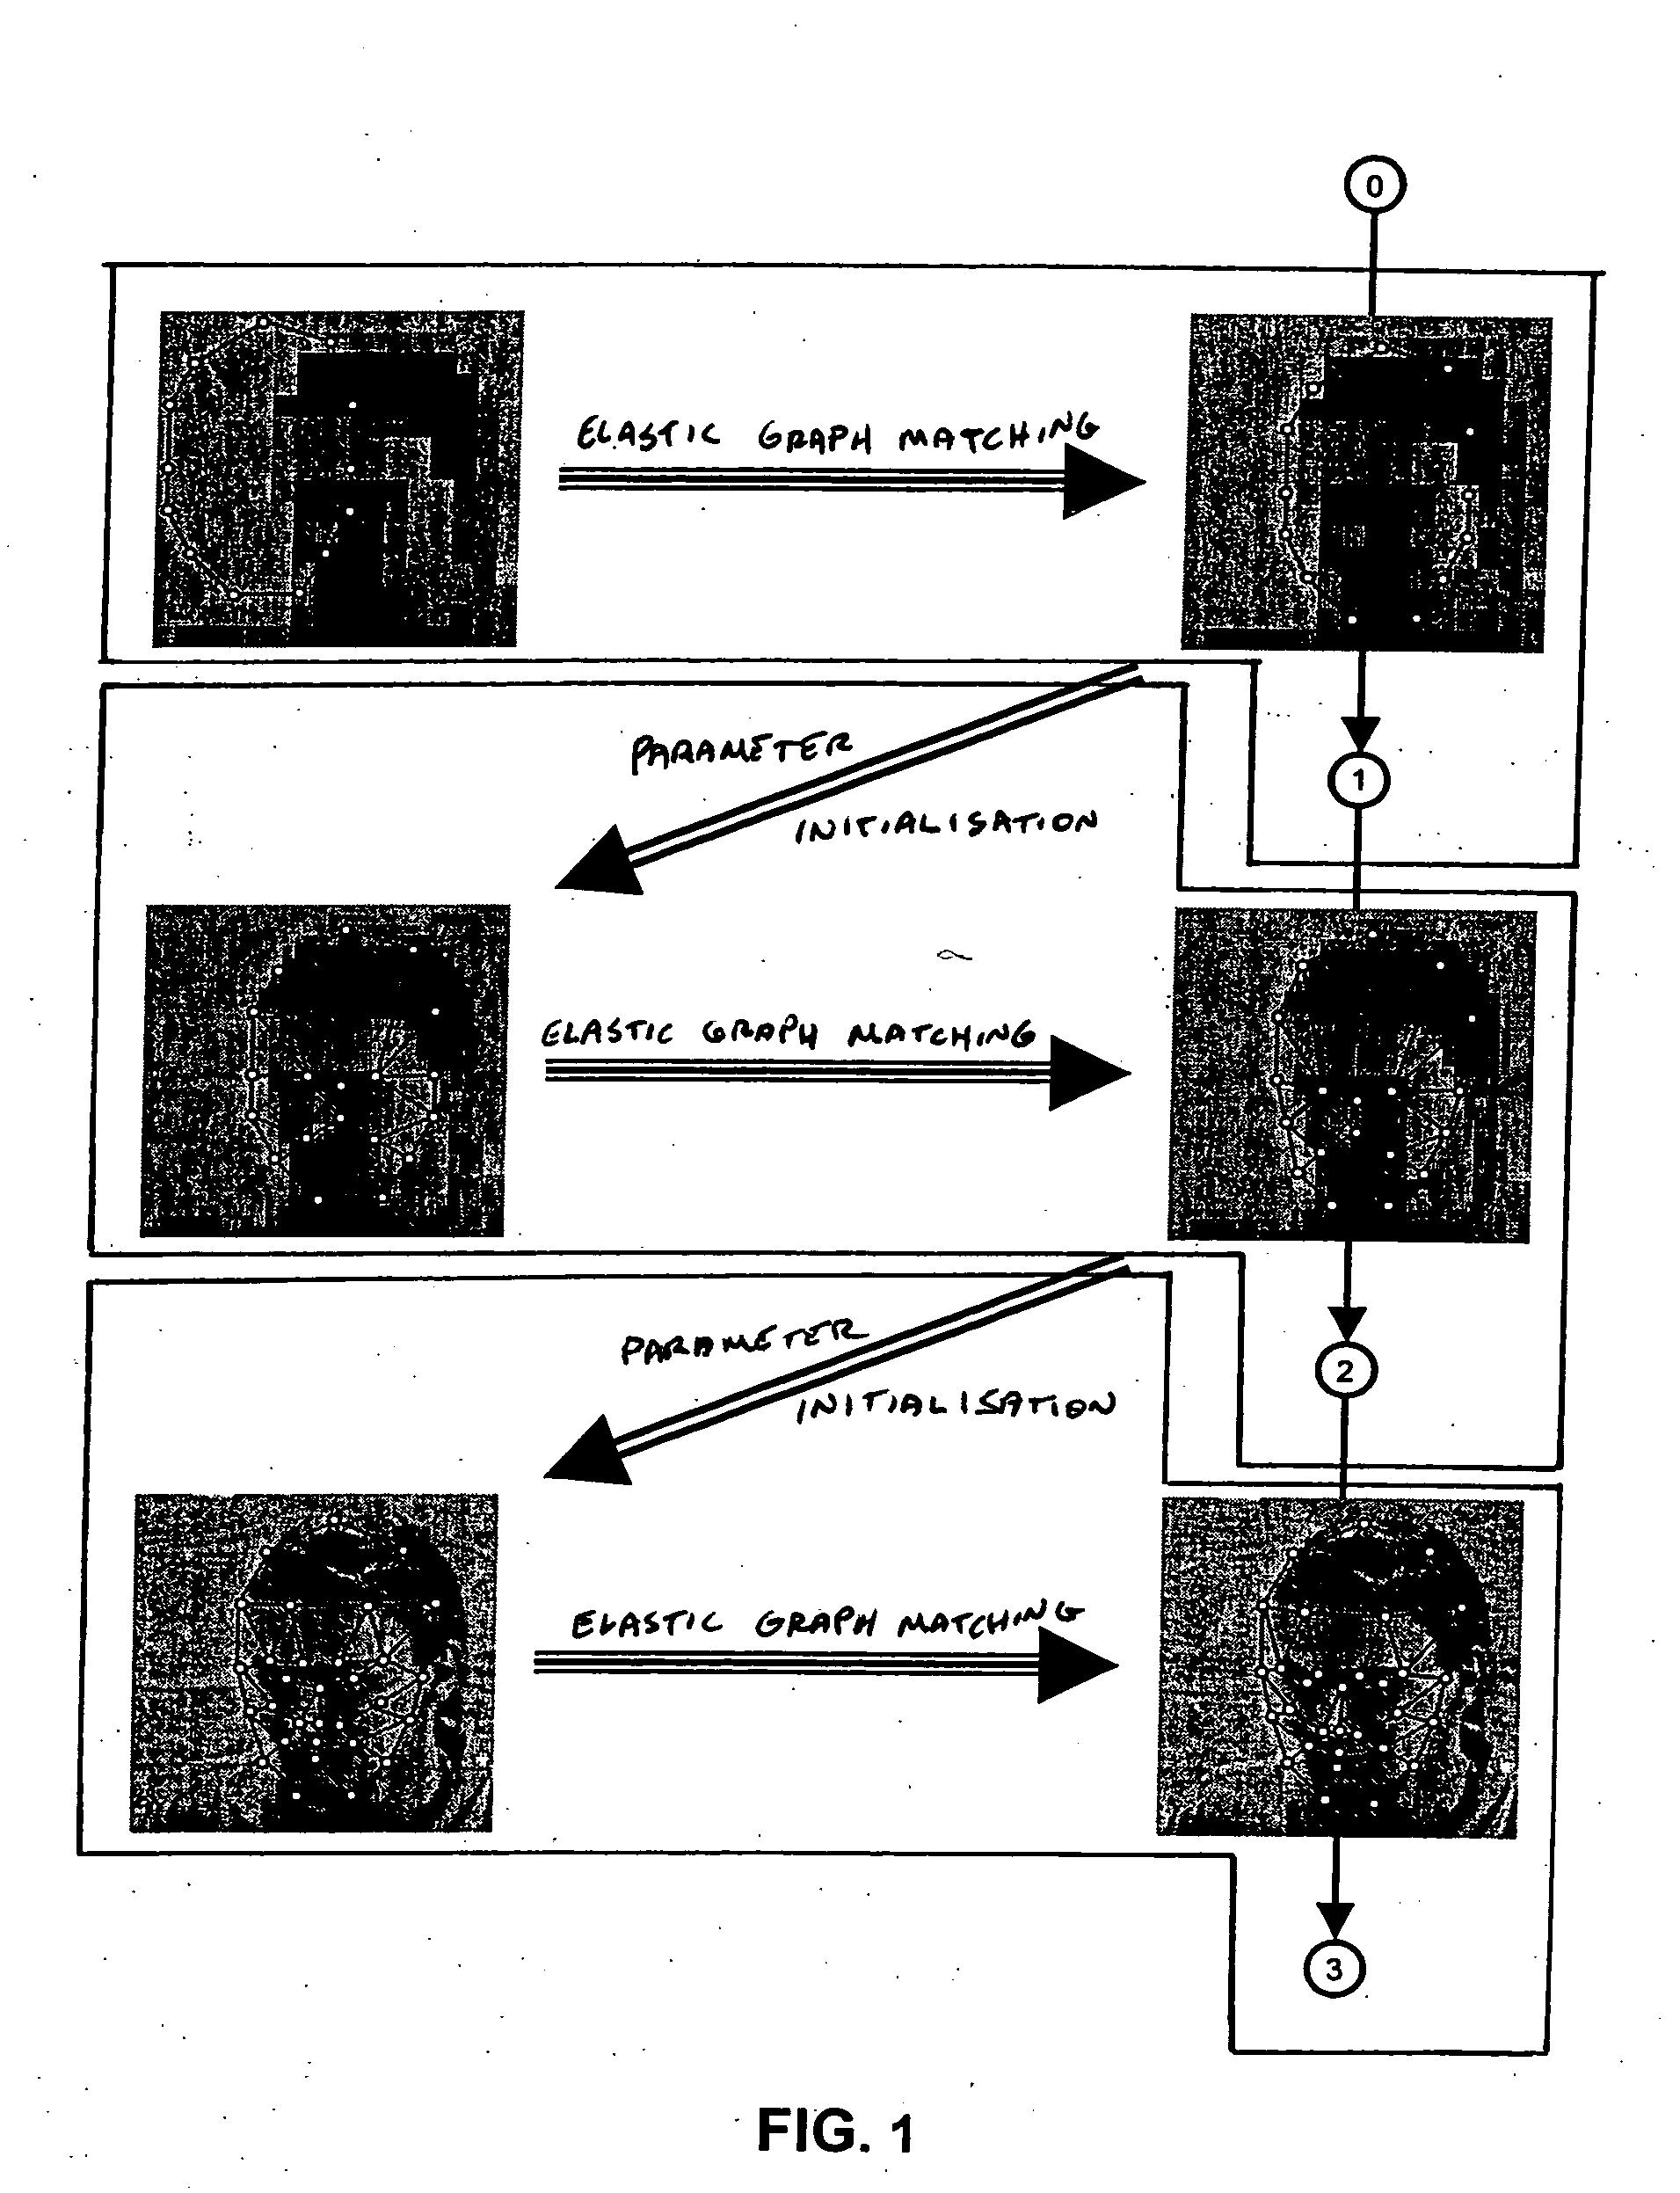 Hierachical image model adaptation